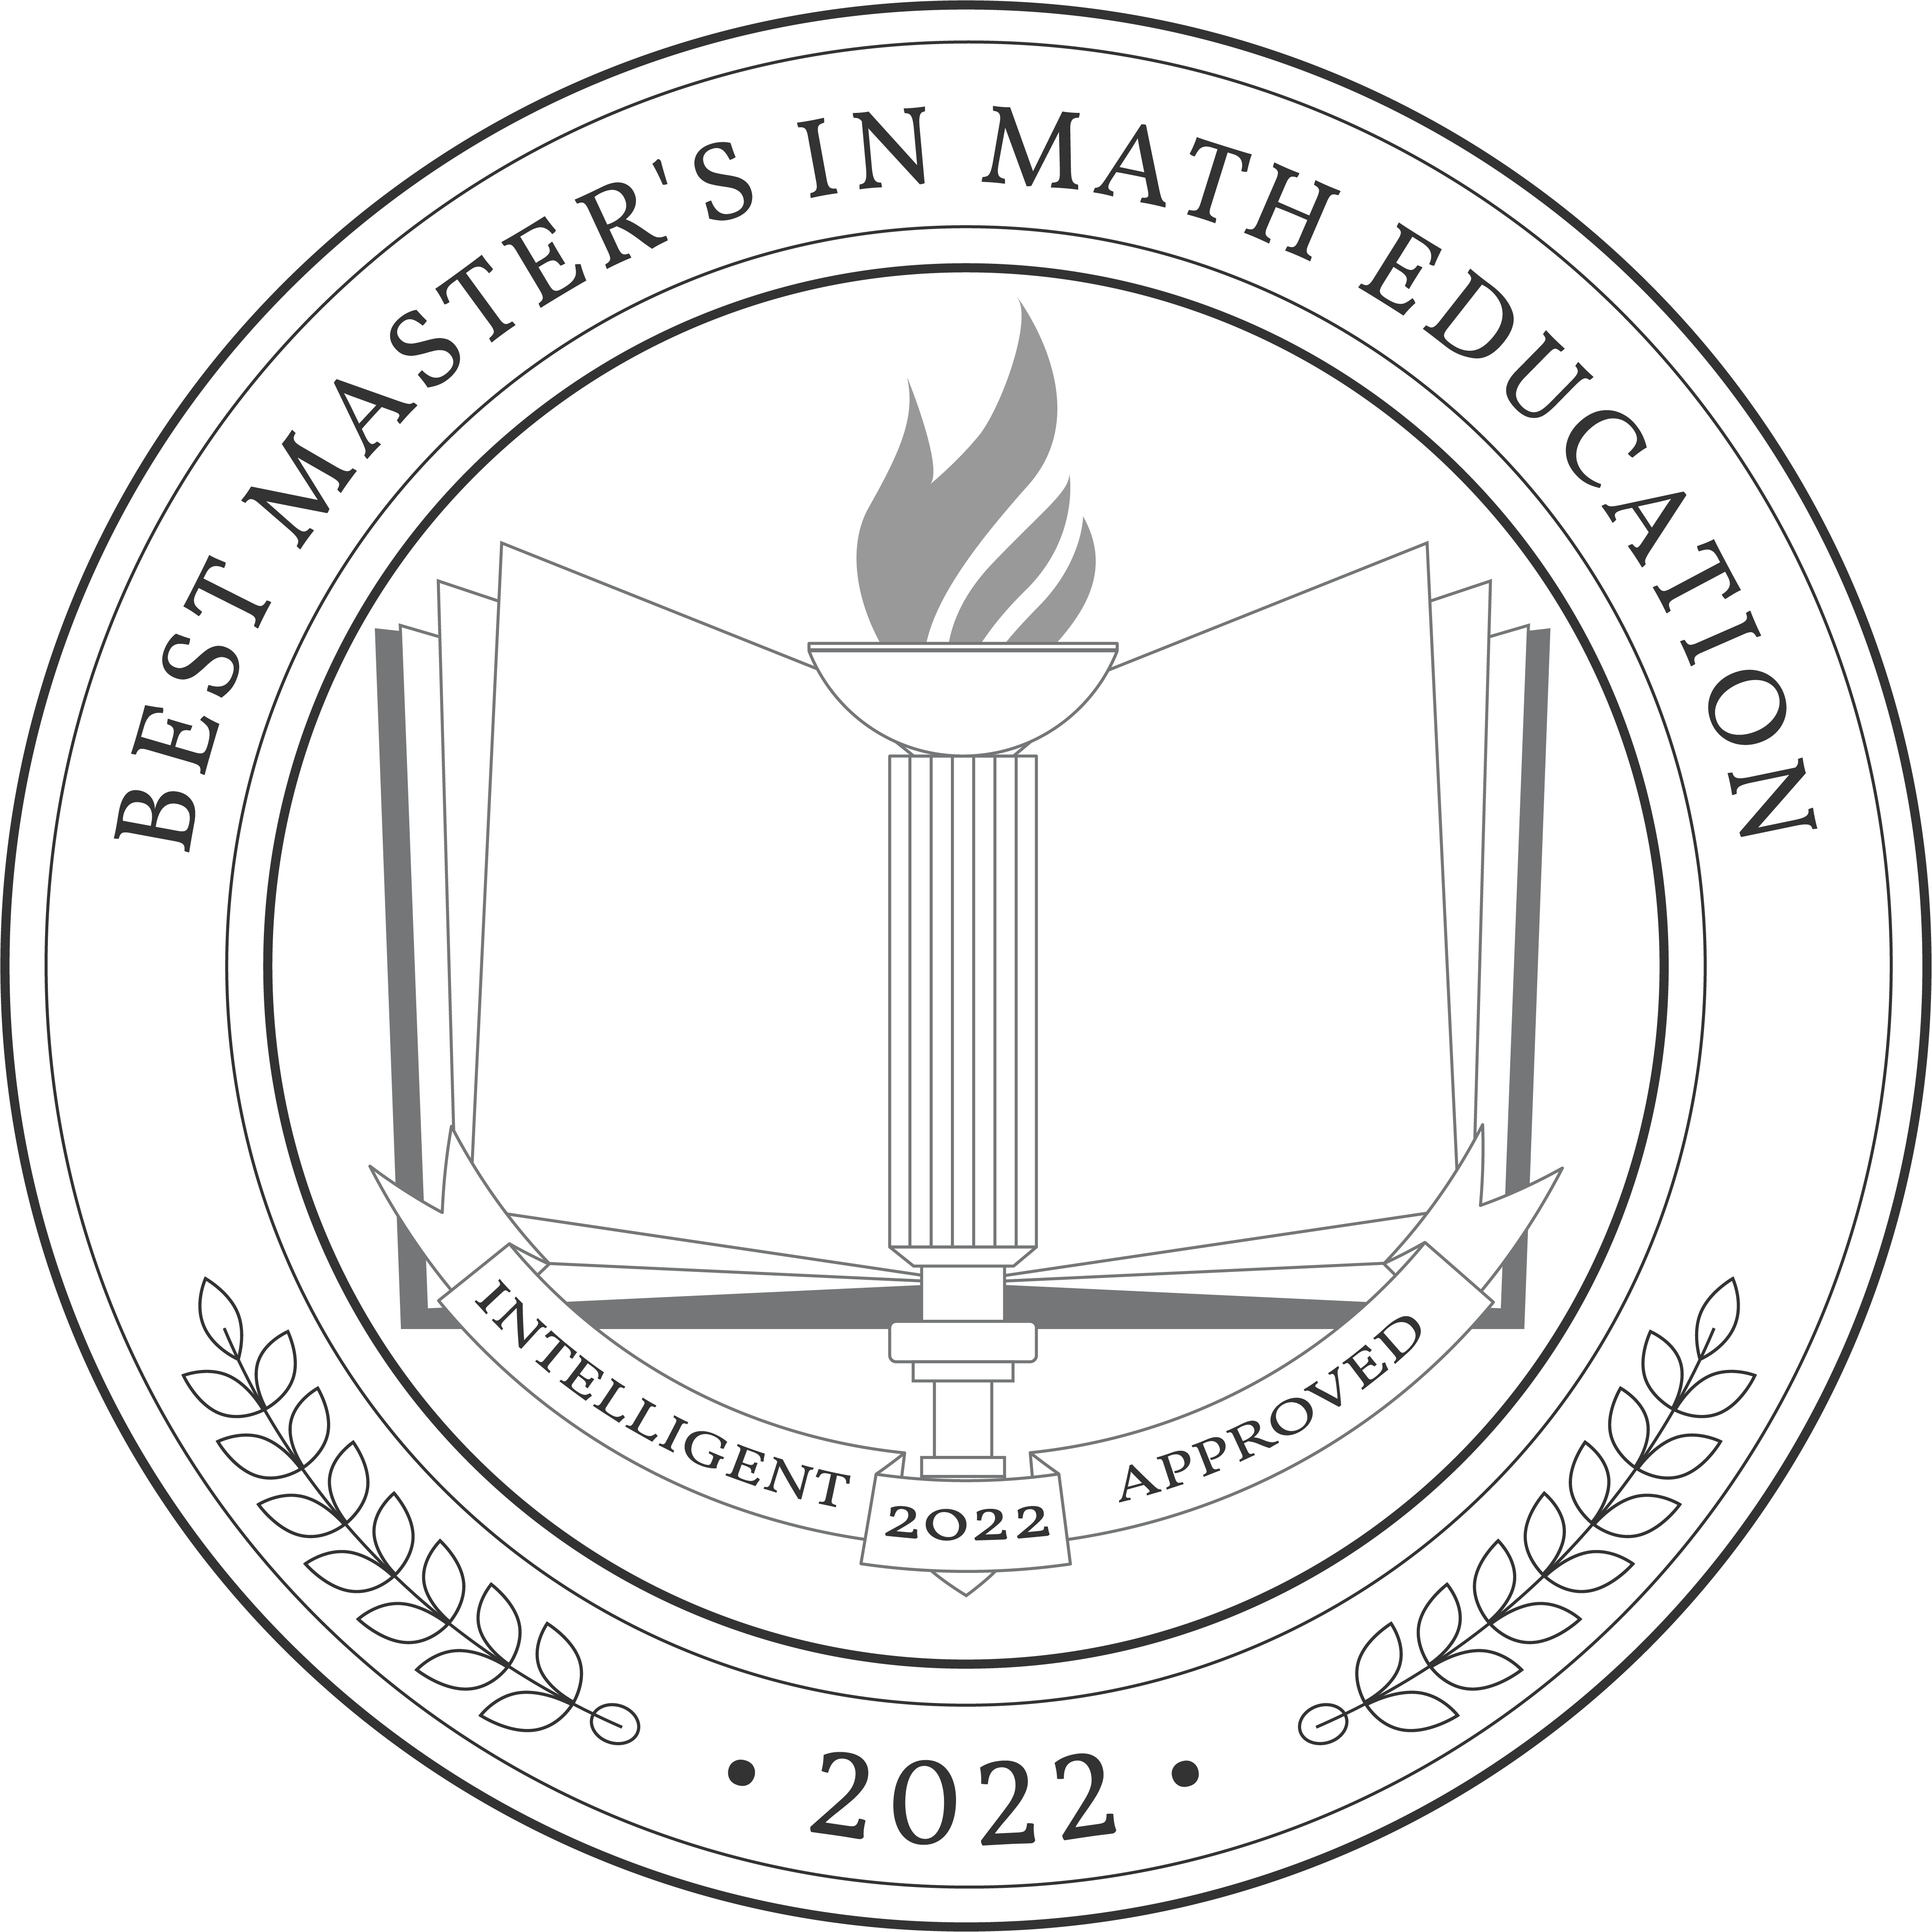 Best Master's in Math Education Badge